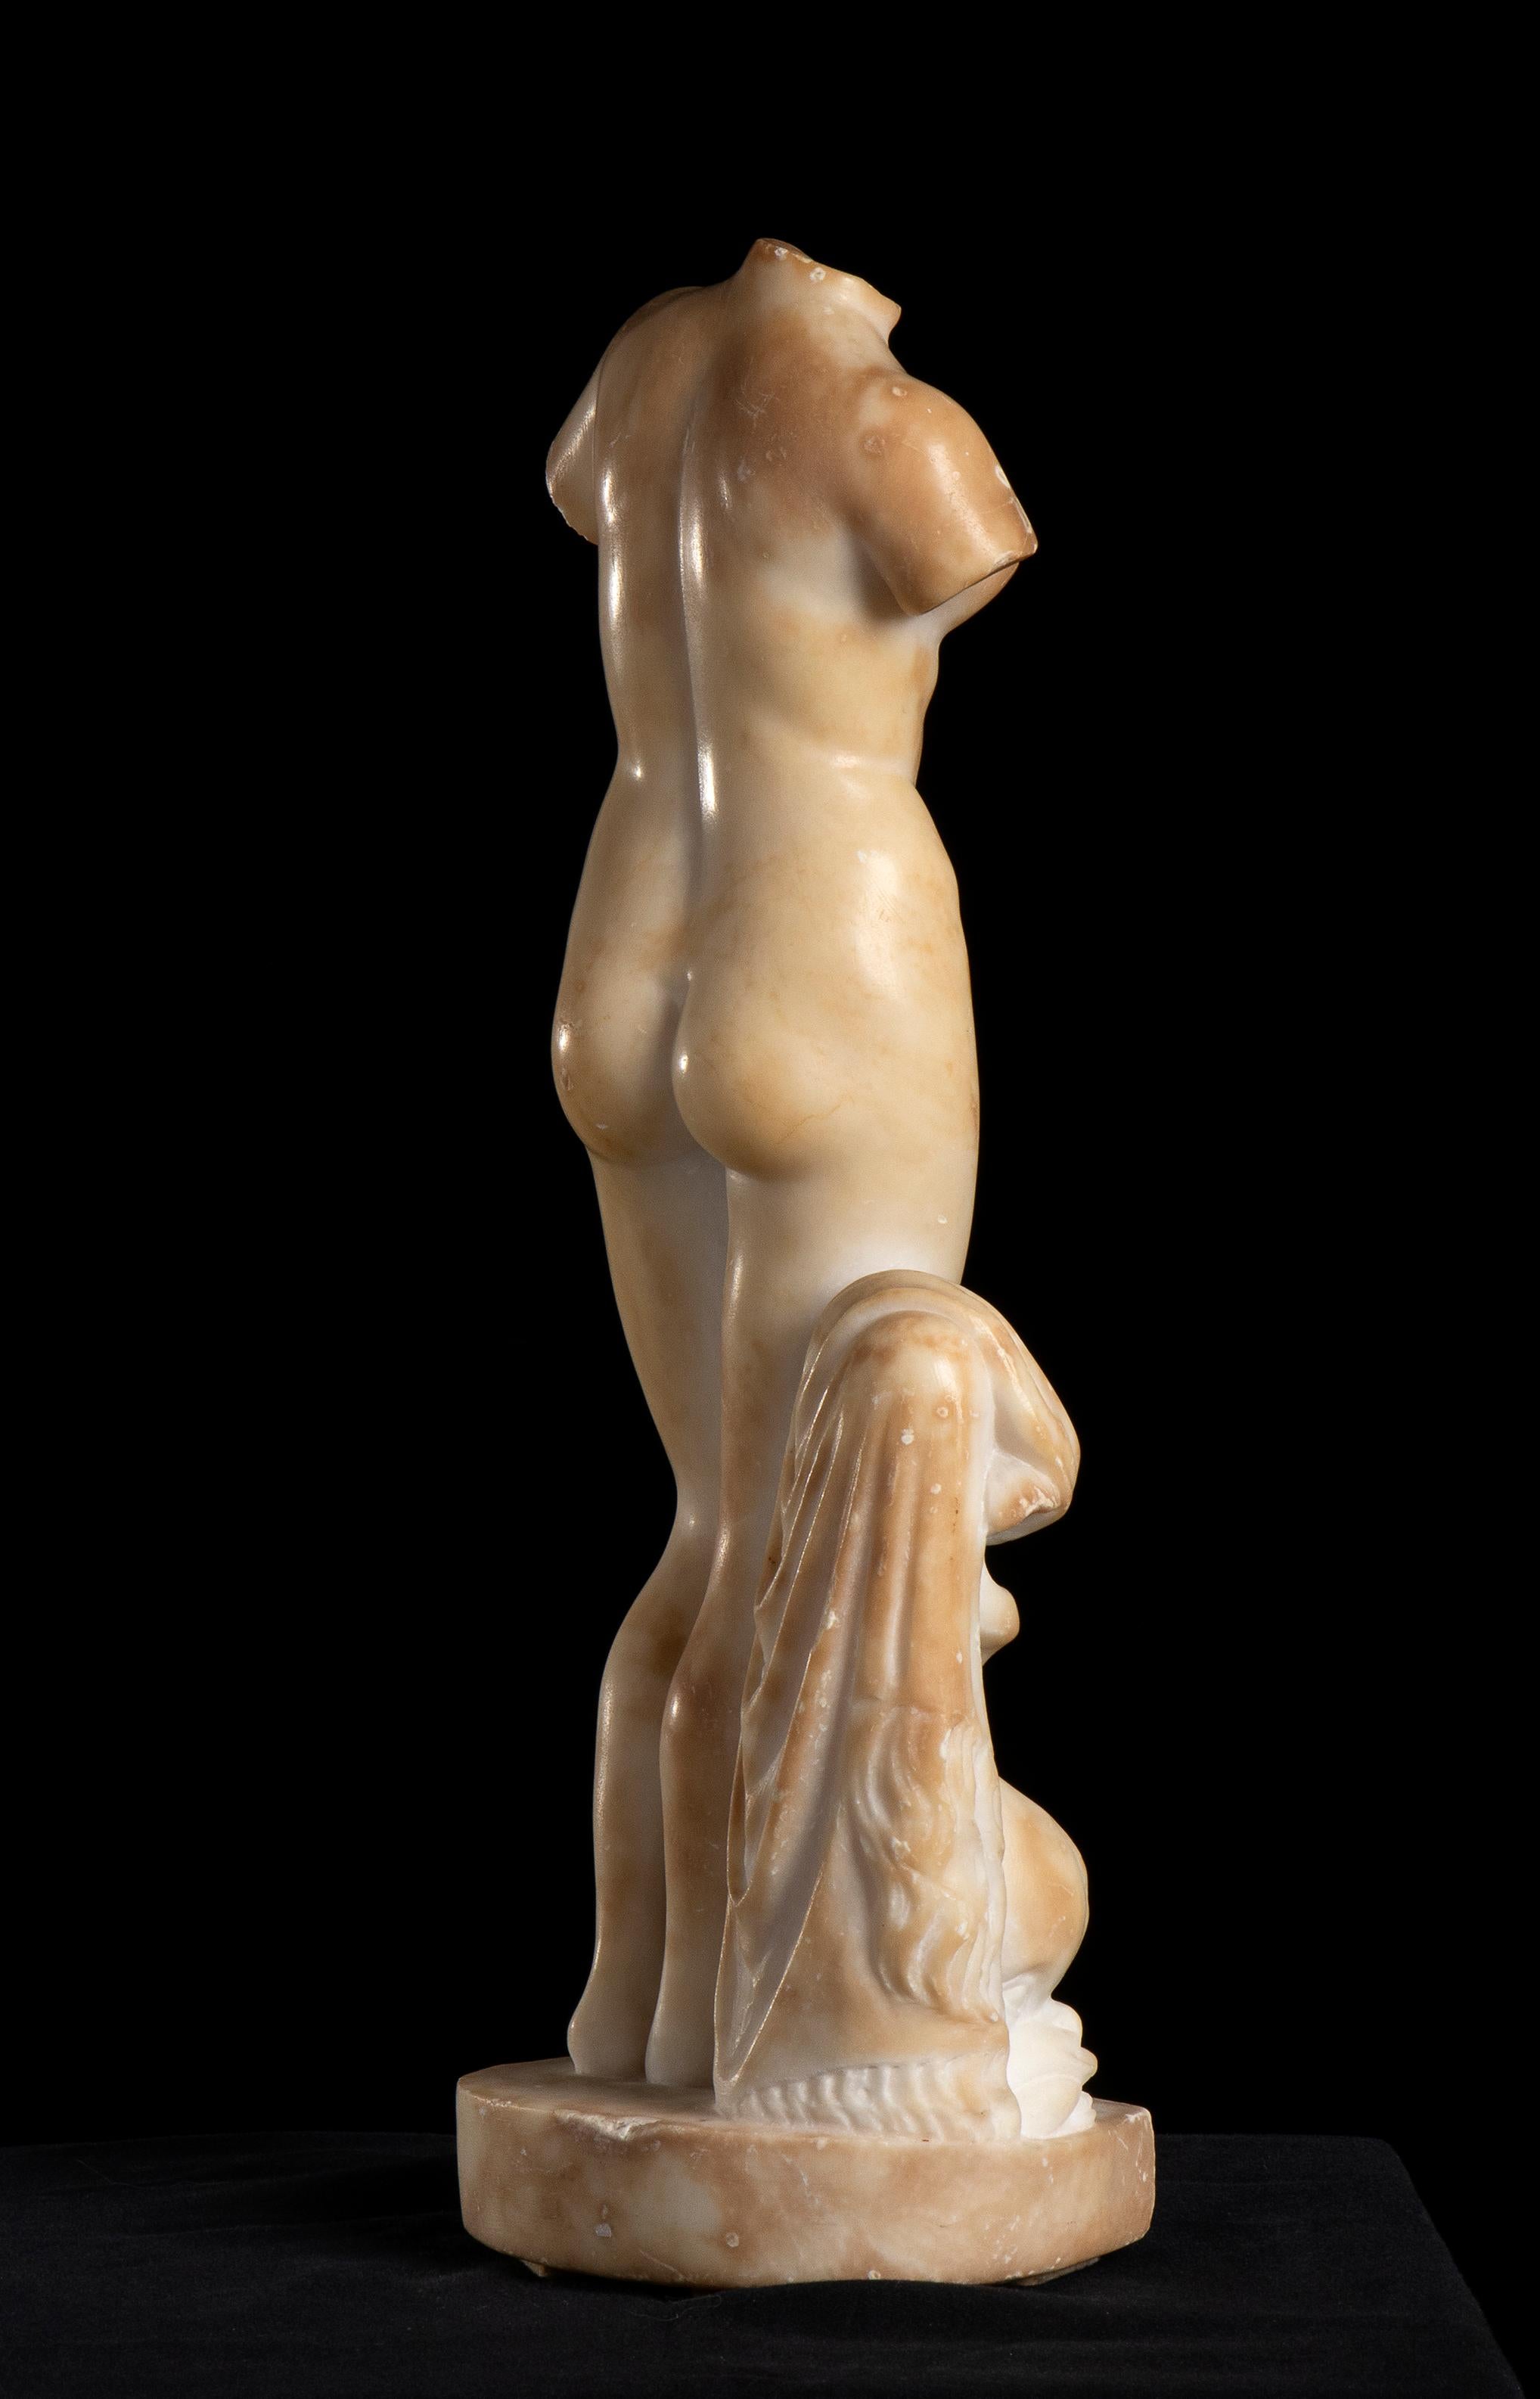 a very beautiful sculpture of Aphrodite , in a natural white marble alabaster of Tuscany central Italy. This piece made after the originals Hellenistic sculptures of Aphrodite and after the Roman vision of Venus represent a very classical vision of